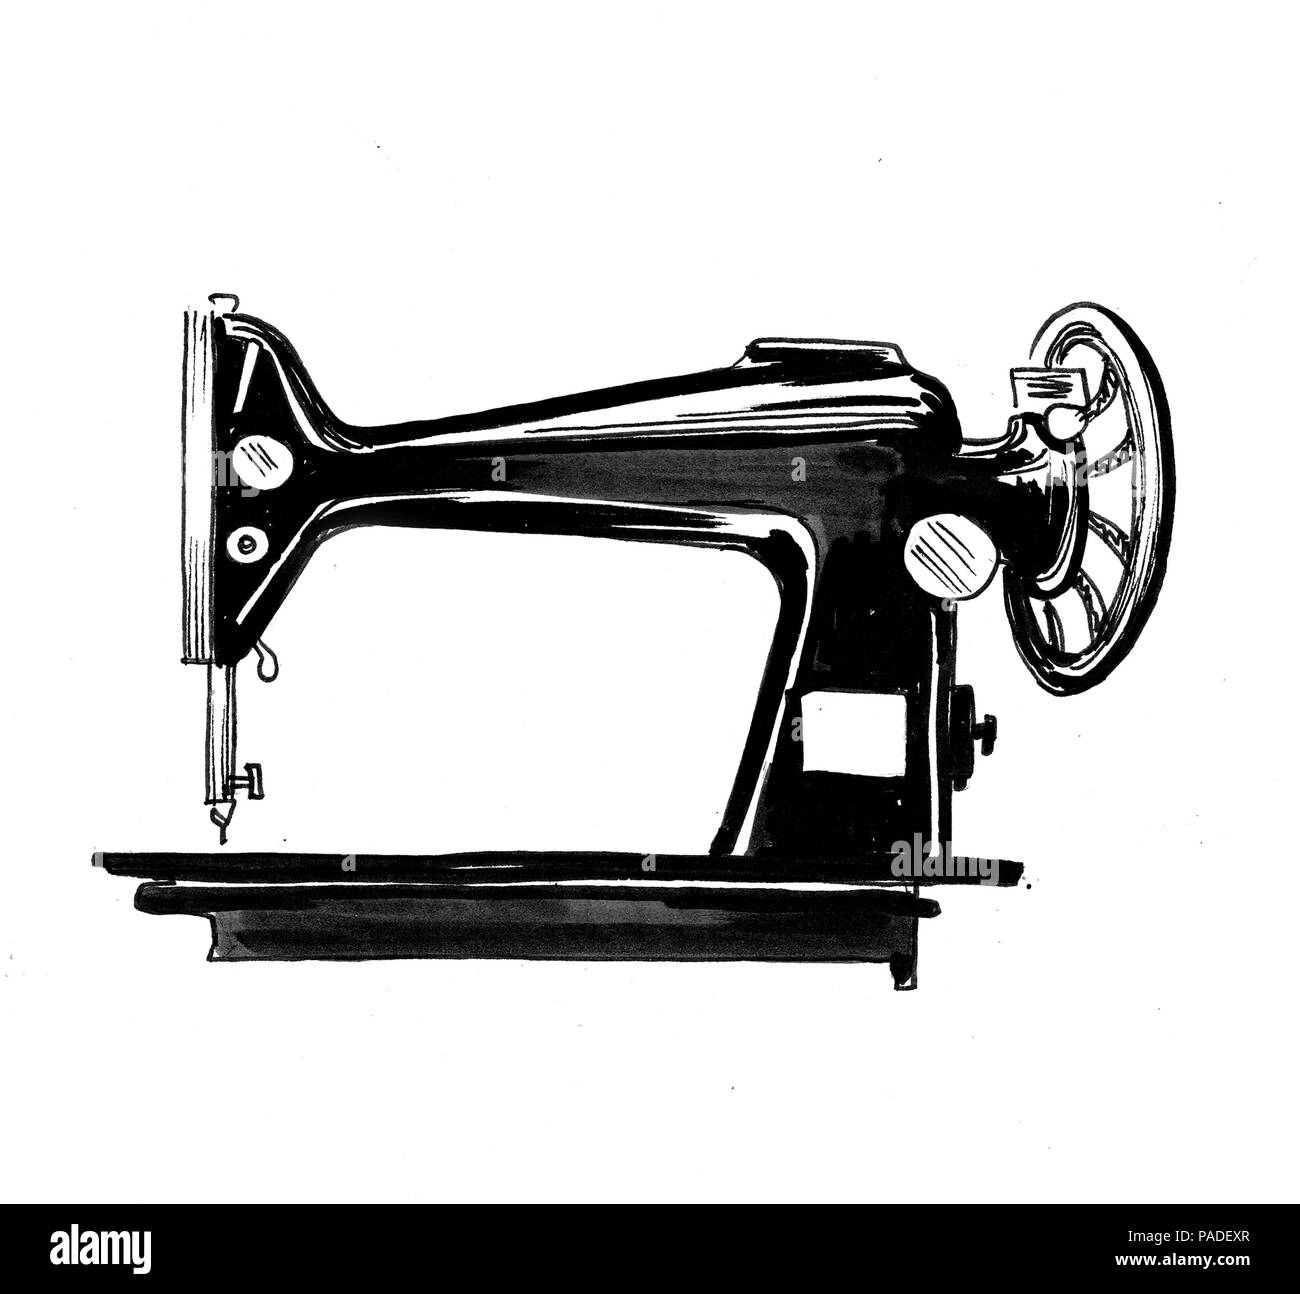 Sewing machine. Ink black and white illustration Stock Photo